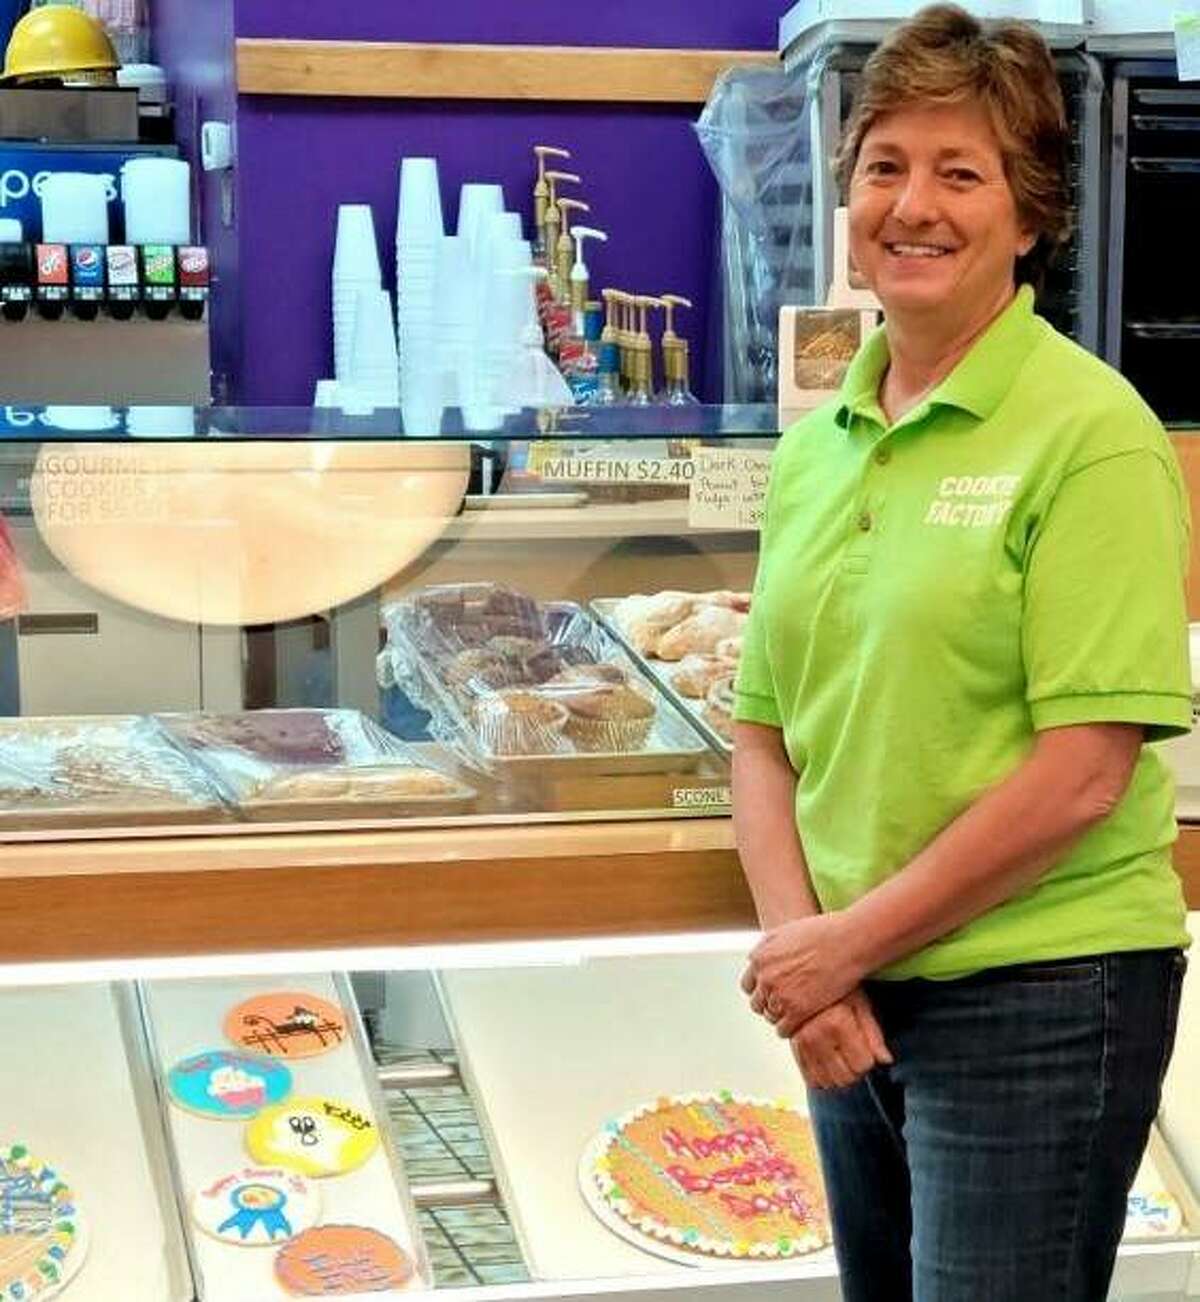 Linda McCormick, of Godfrey, owner of The Cookie Factory and Cookie Express, stands in front of her first cookie shop at 202 Alton Square which she bought in November 1978. She is retiring Jan. 1 and the business is for sale, including her second shop, Cookie Express, opened four years ago at 121 Alton Square.